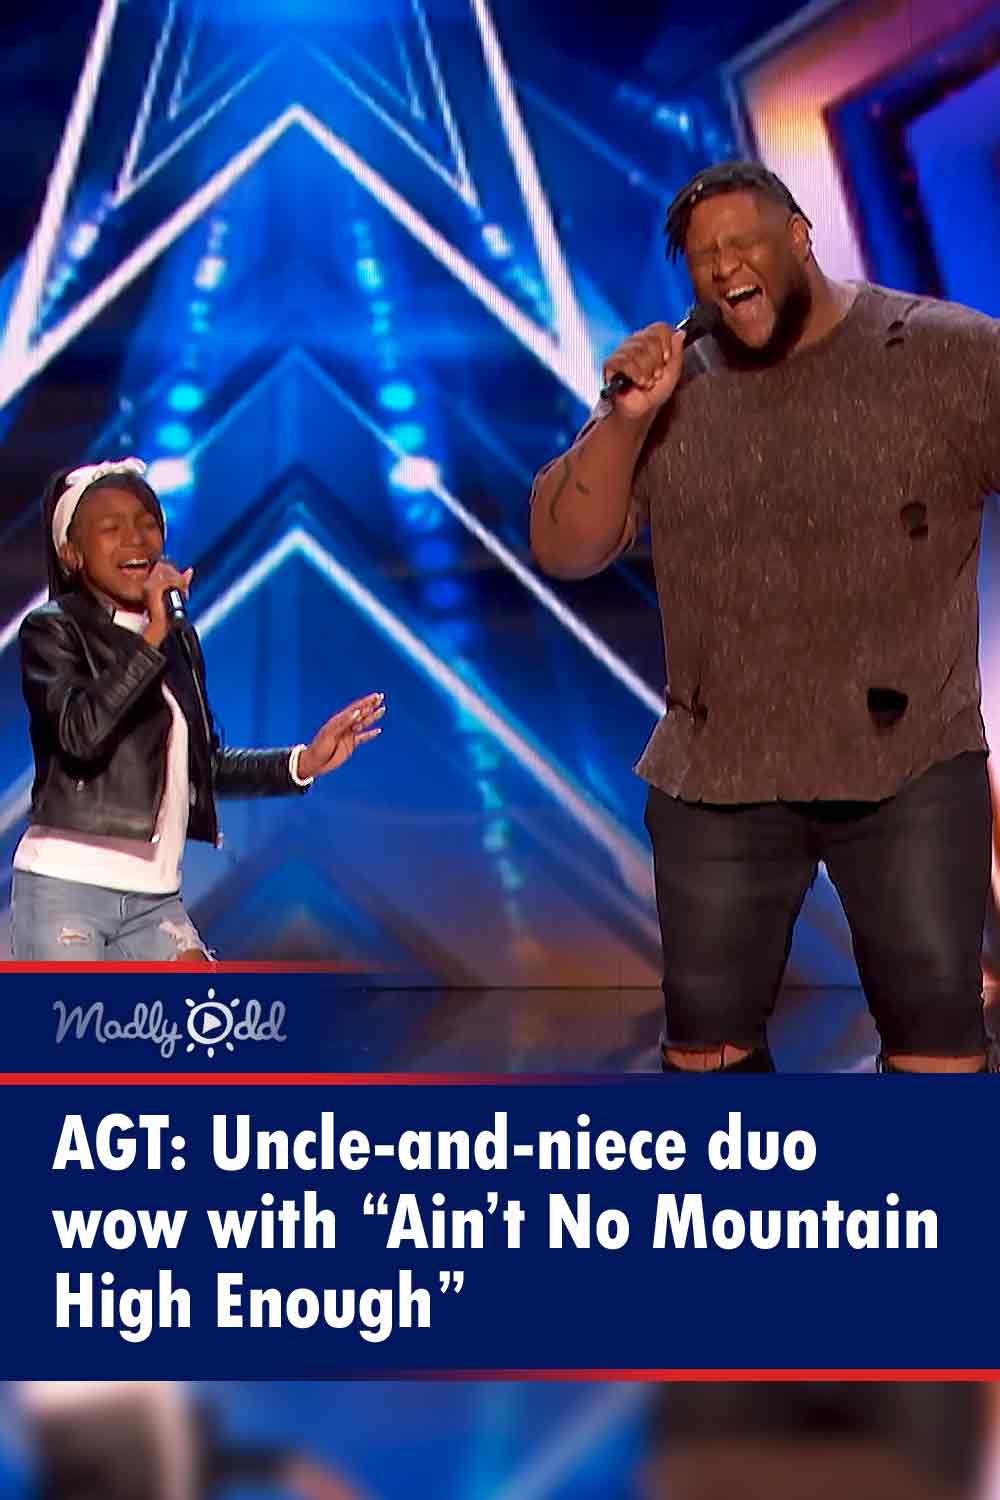 AGT: Uncle-and-niece duo wow with “Ain’t No Mountain High Enough”